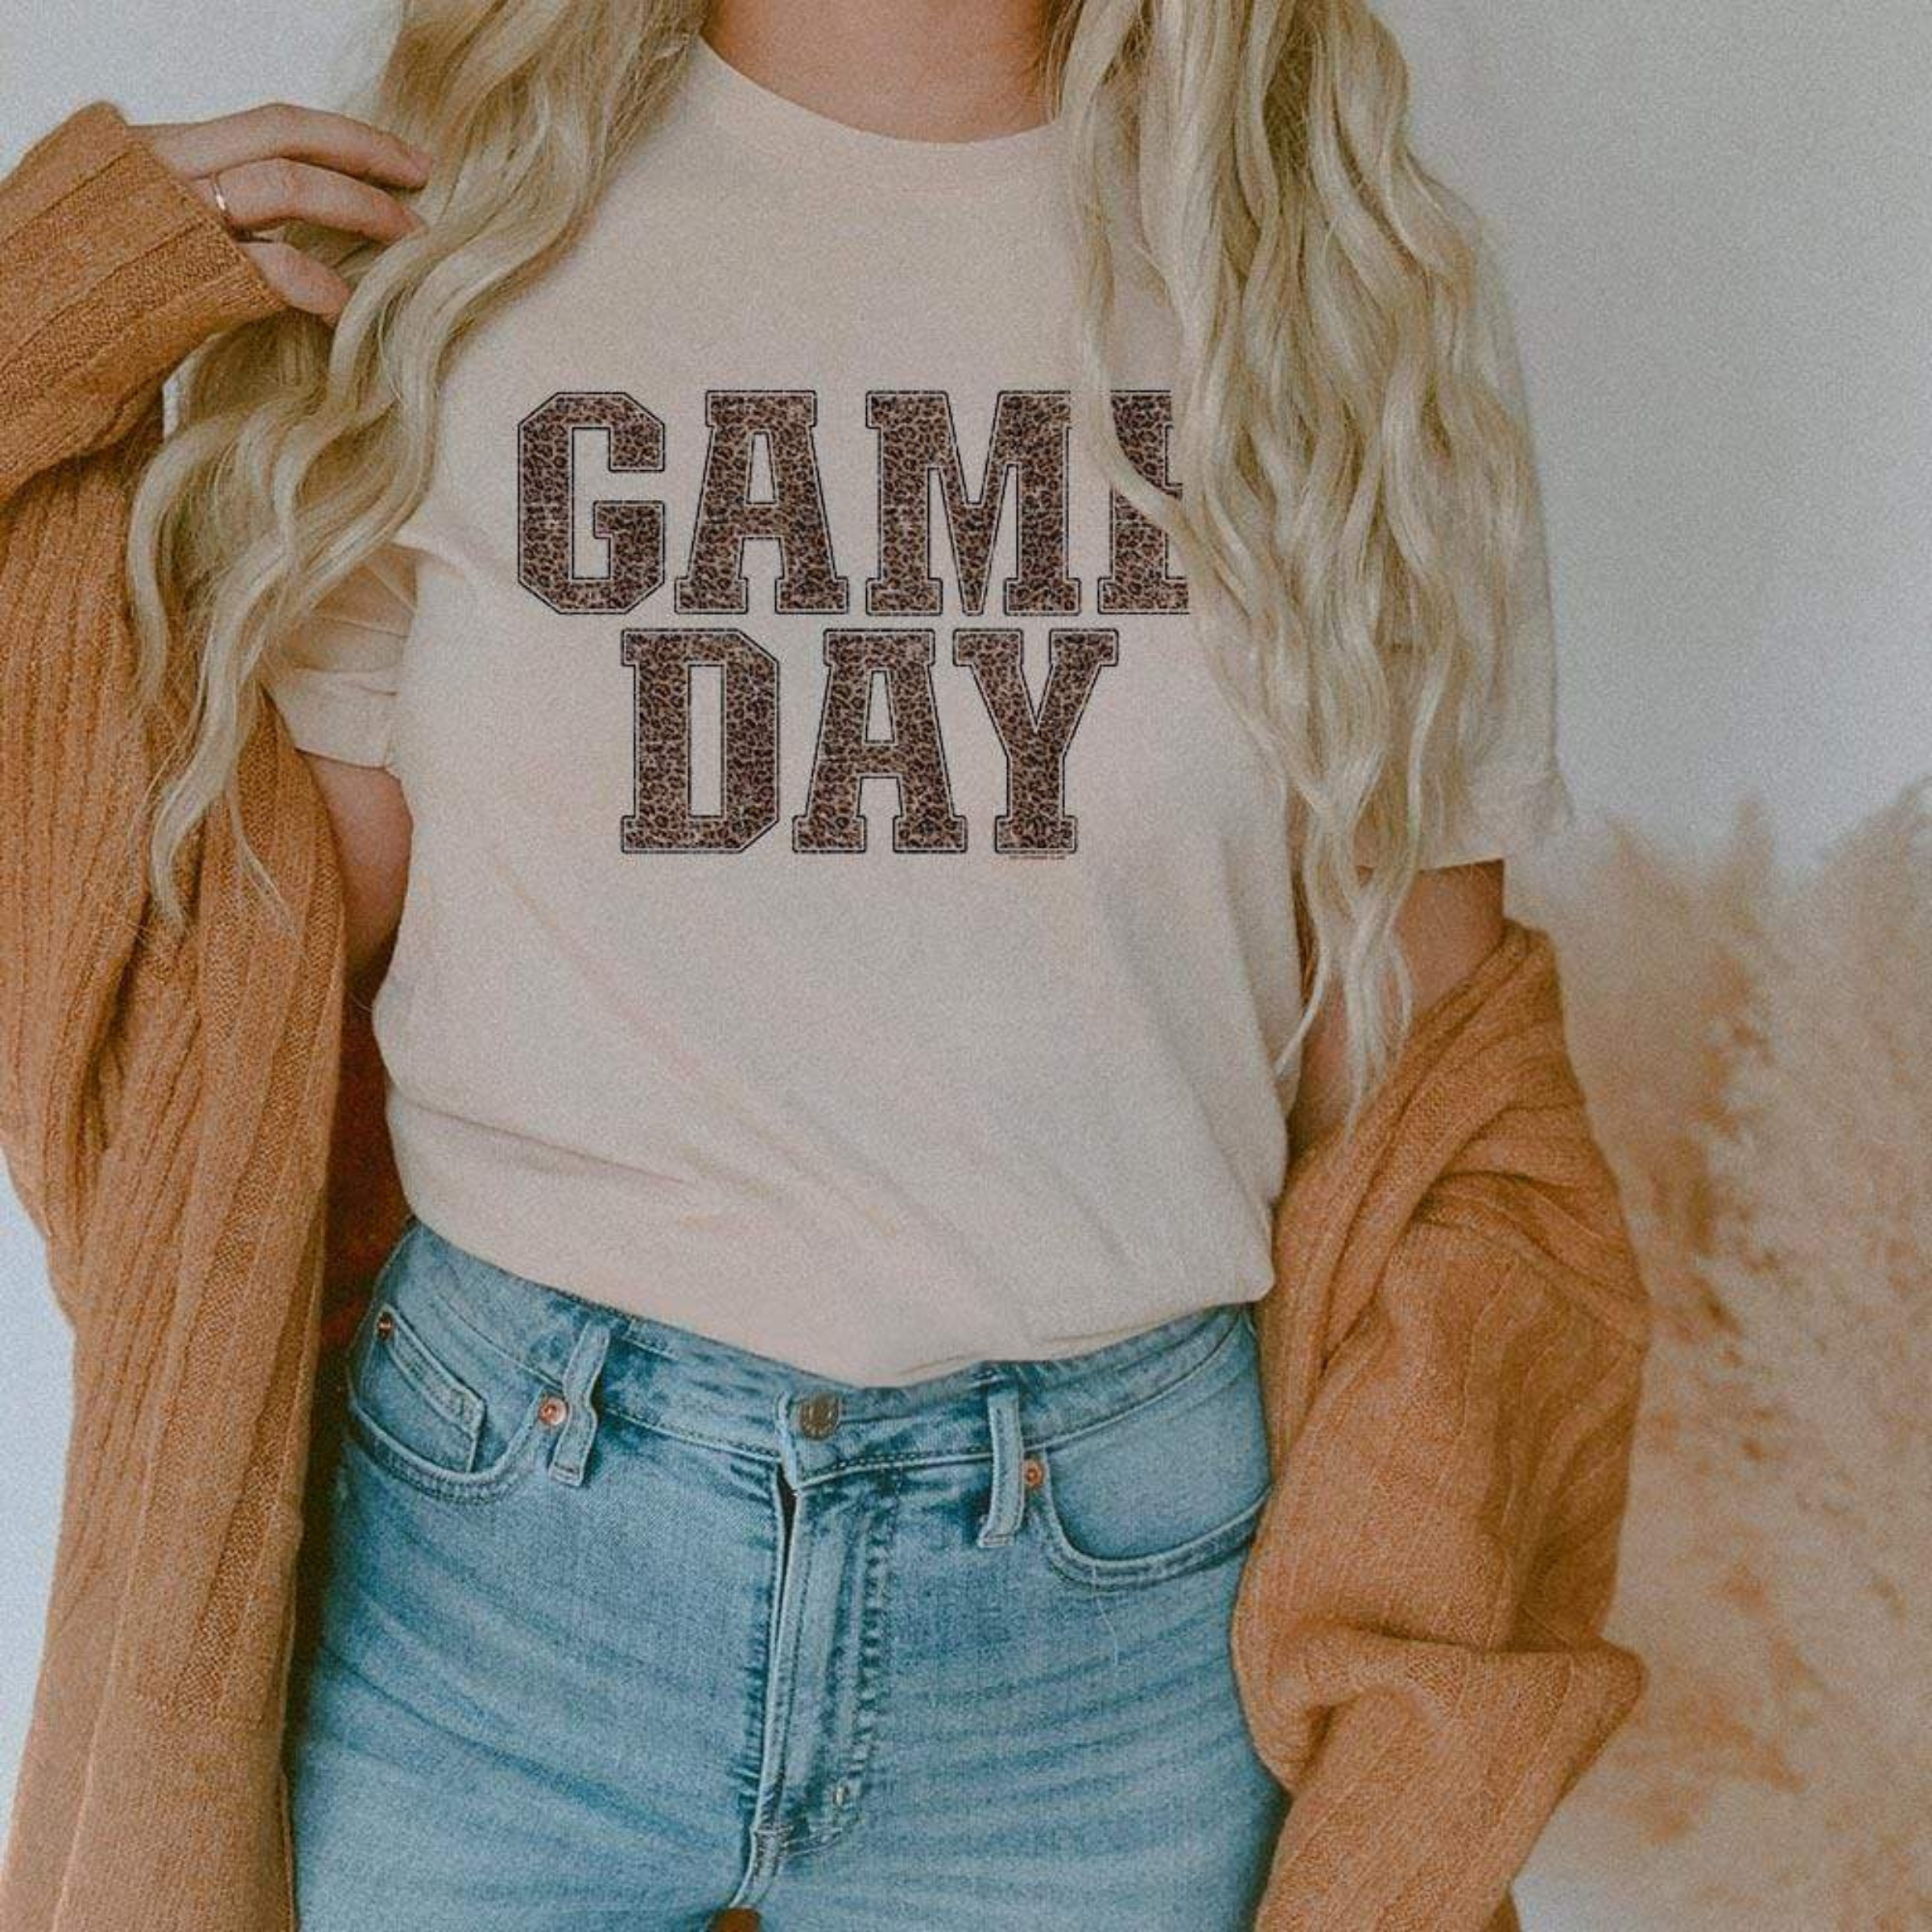 Model is wearing a cream colored short sleeve crewneck tee featuring a leopard print graphic that says "Game day"